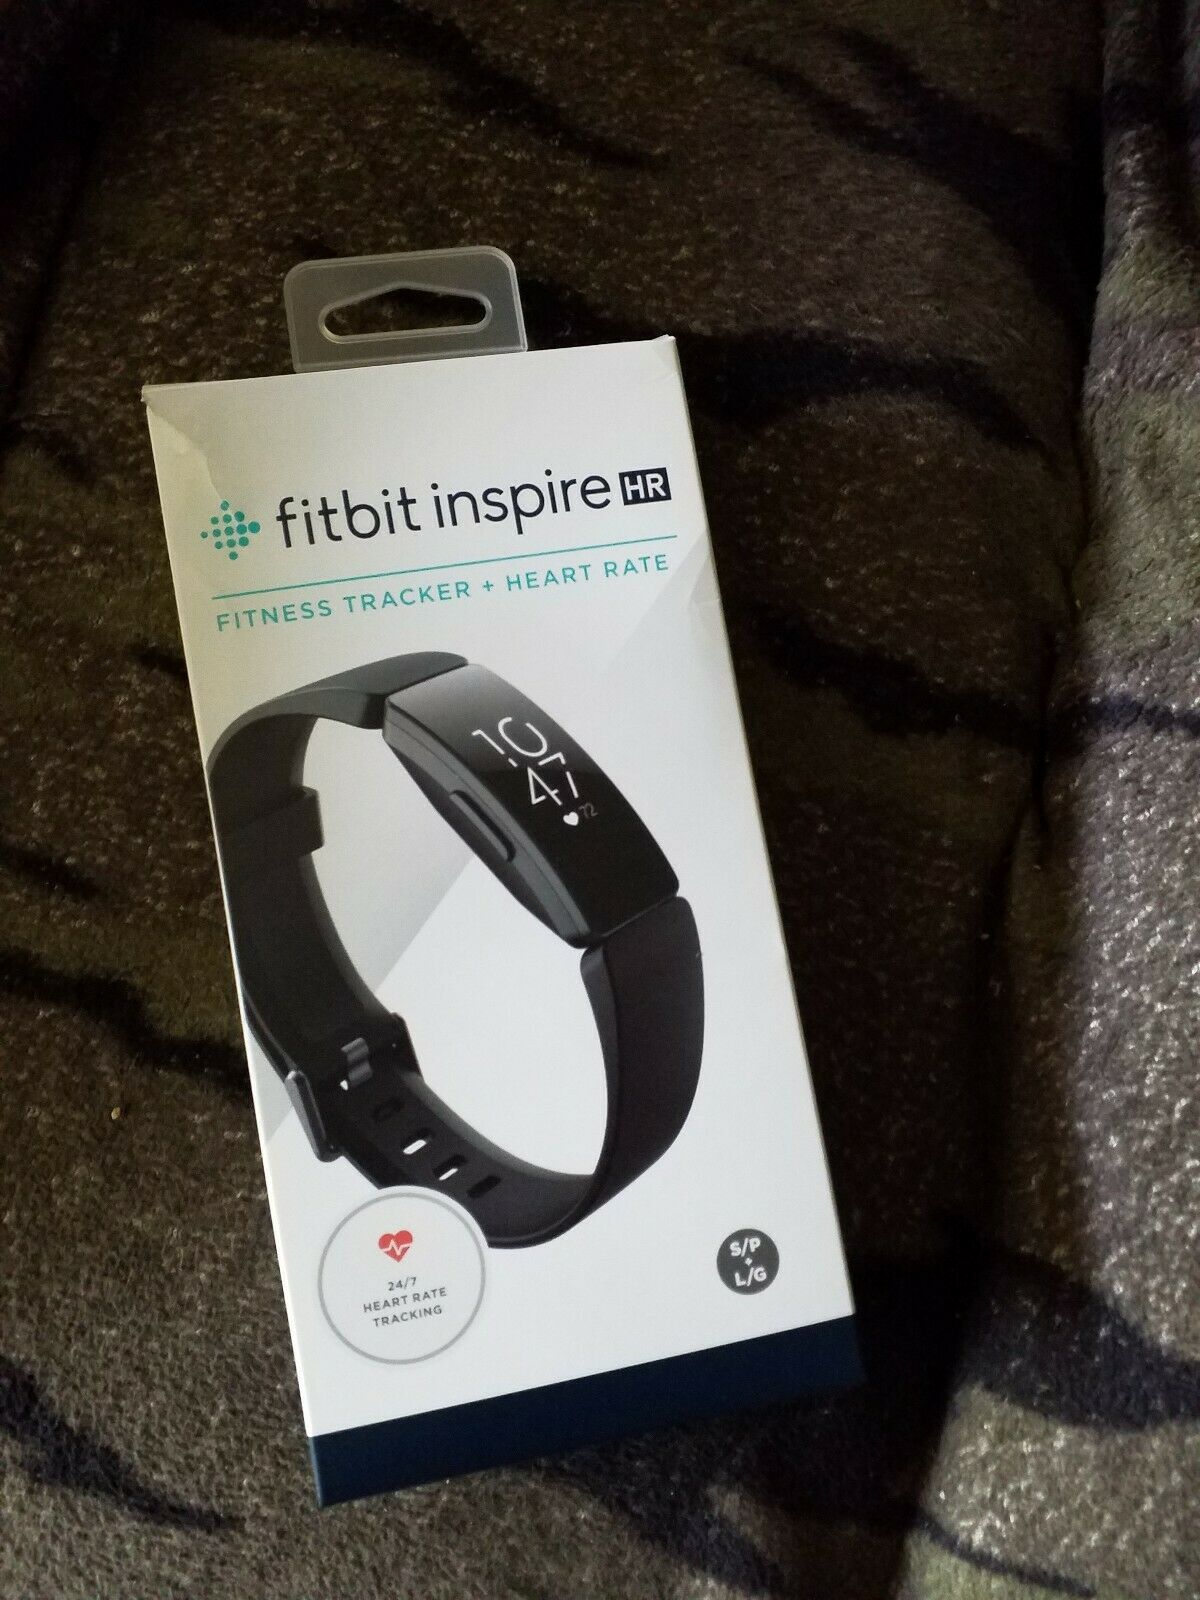 Restored Fitbit FB413BKBK Inspire HR Heart Rate & Fitness Tracker, One Size (S & L bands included) (Refurbished) - image 1 of 6